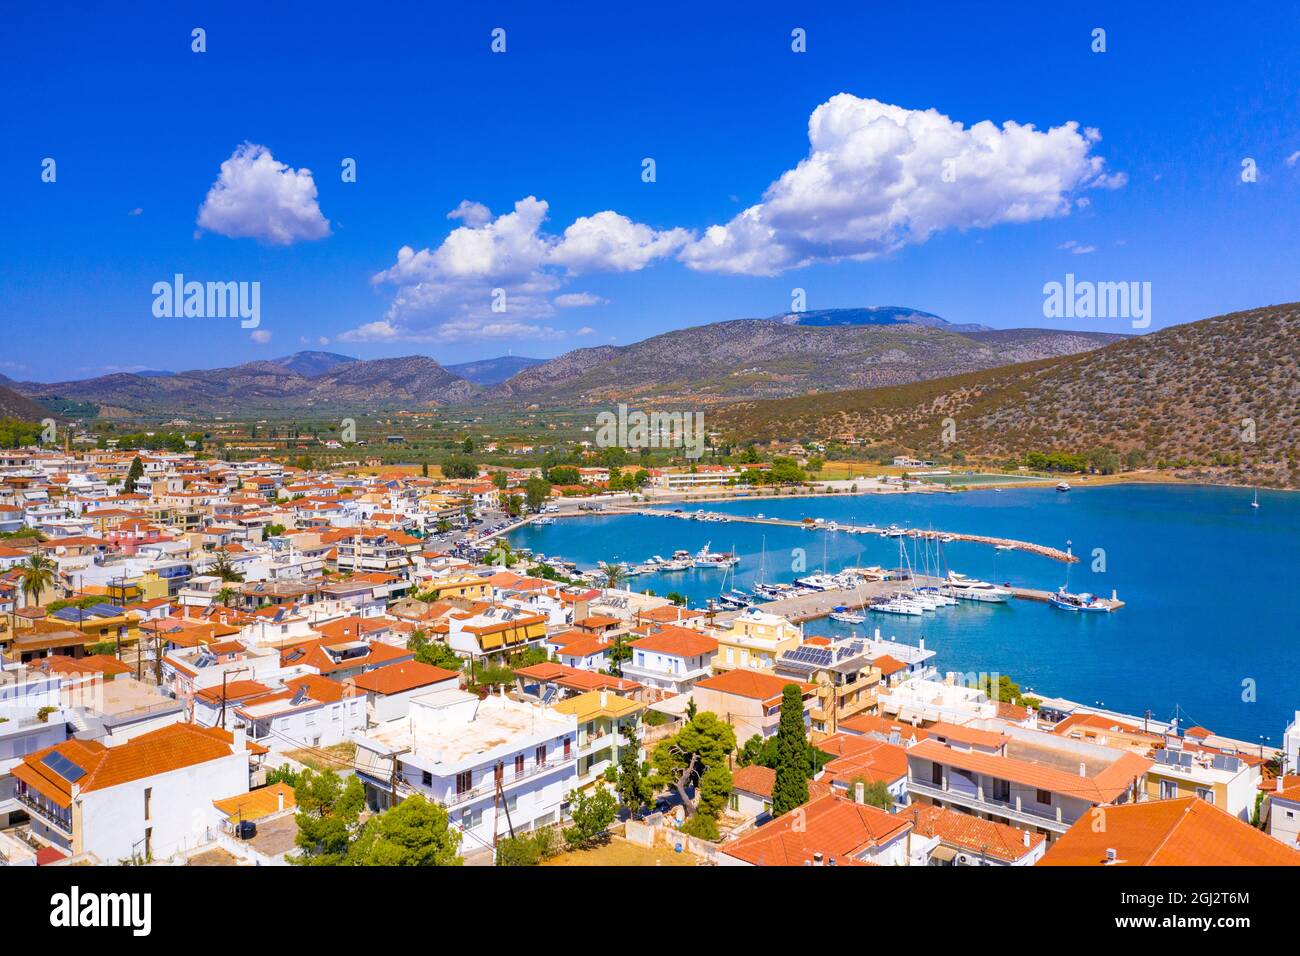 View of the picturesque coastal town of Ermioni, Peloponnese, Greece. Stock Photo